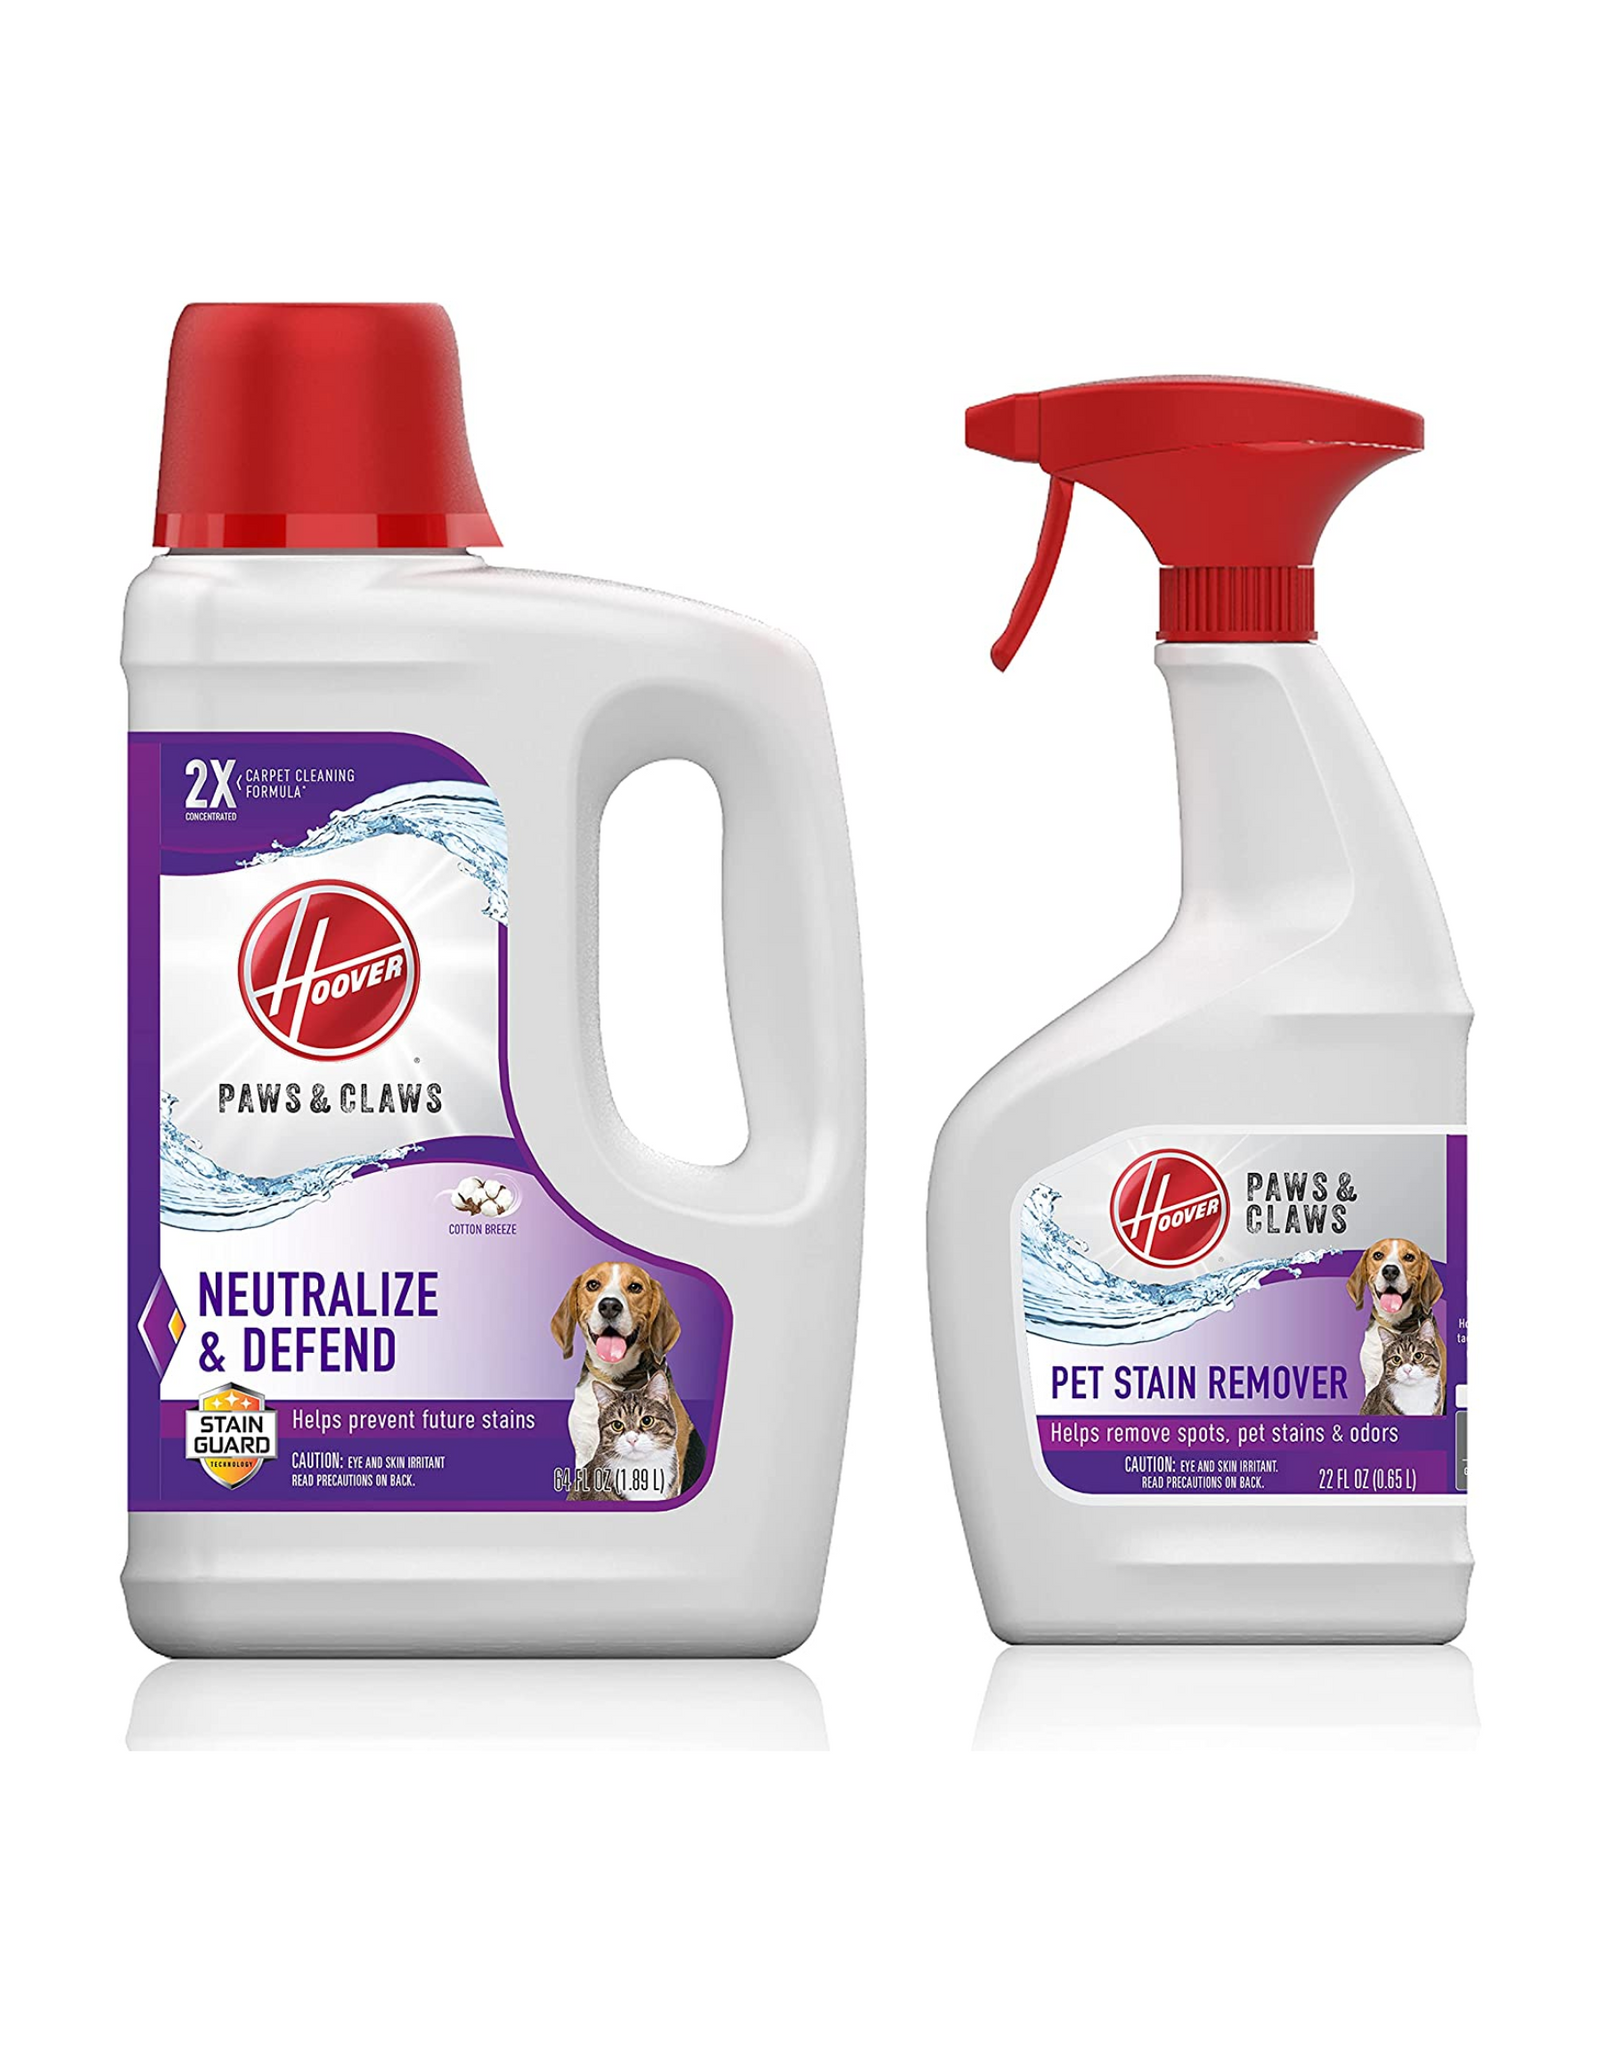 Hoover Paws & Claws Solution Bundle AH33008, Deep Cleaning Shampoo with Pet Spot and Stain Remover, White